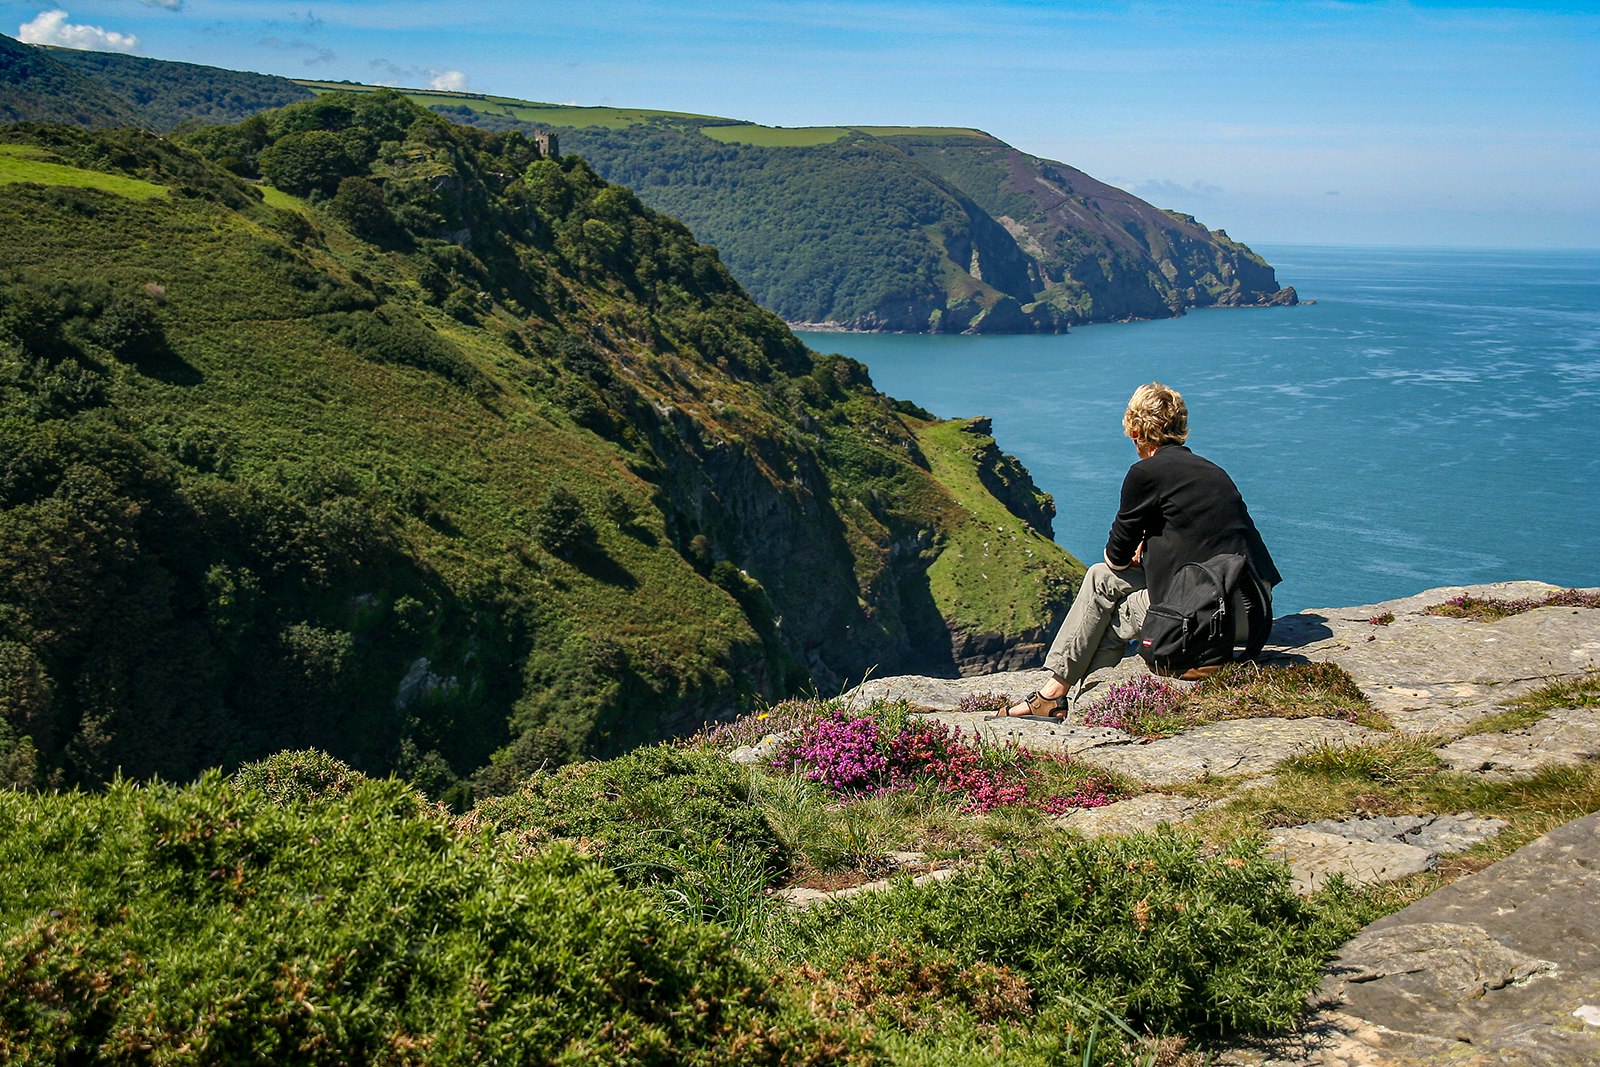 A blond person sits on a rocky outcropping, overlooking a coastline abutted by green cliffs. England.